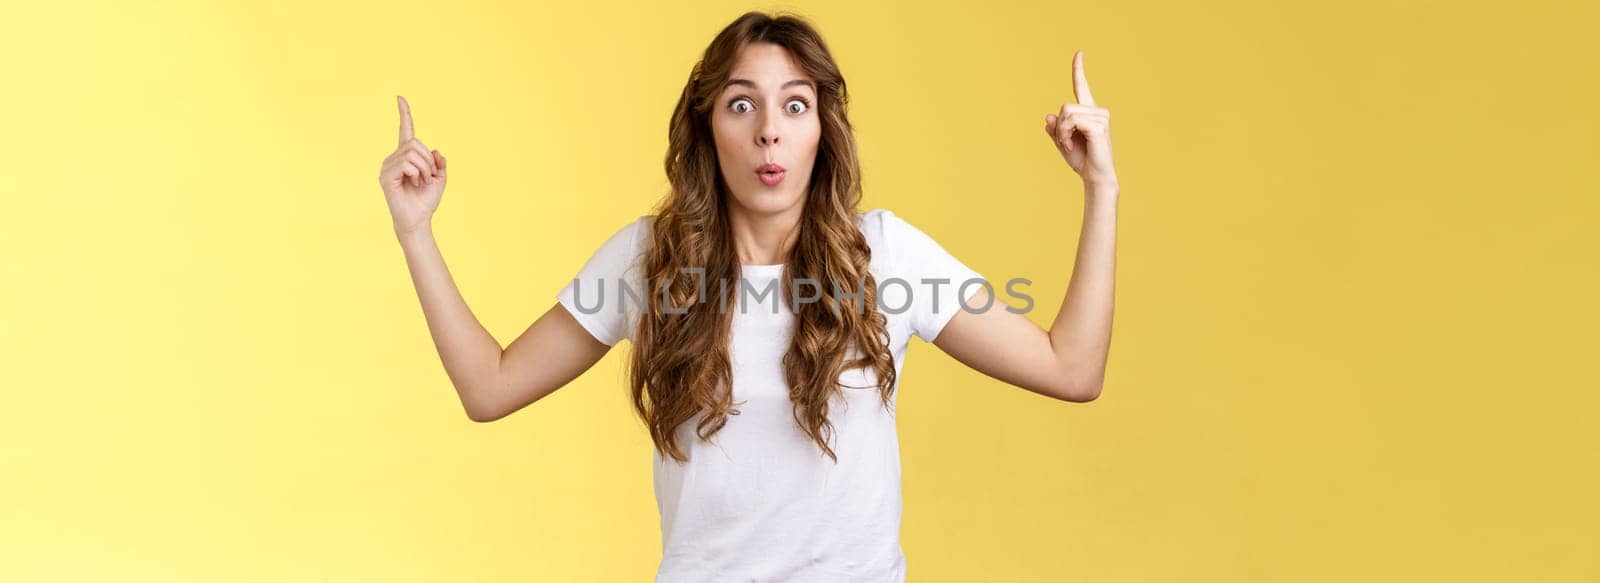 Omg stunning promo look. Surprised astonished impressed good-looking girl stare camera excited react awesome promo raise index fingers pointing up telling you about incredible advertisement.